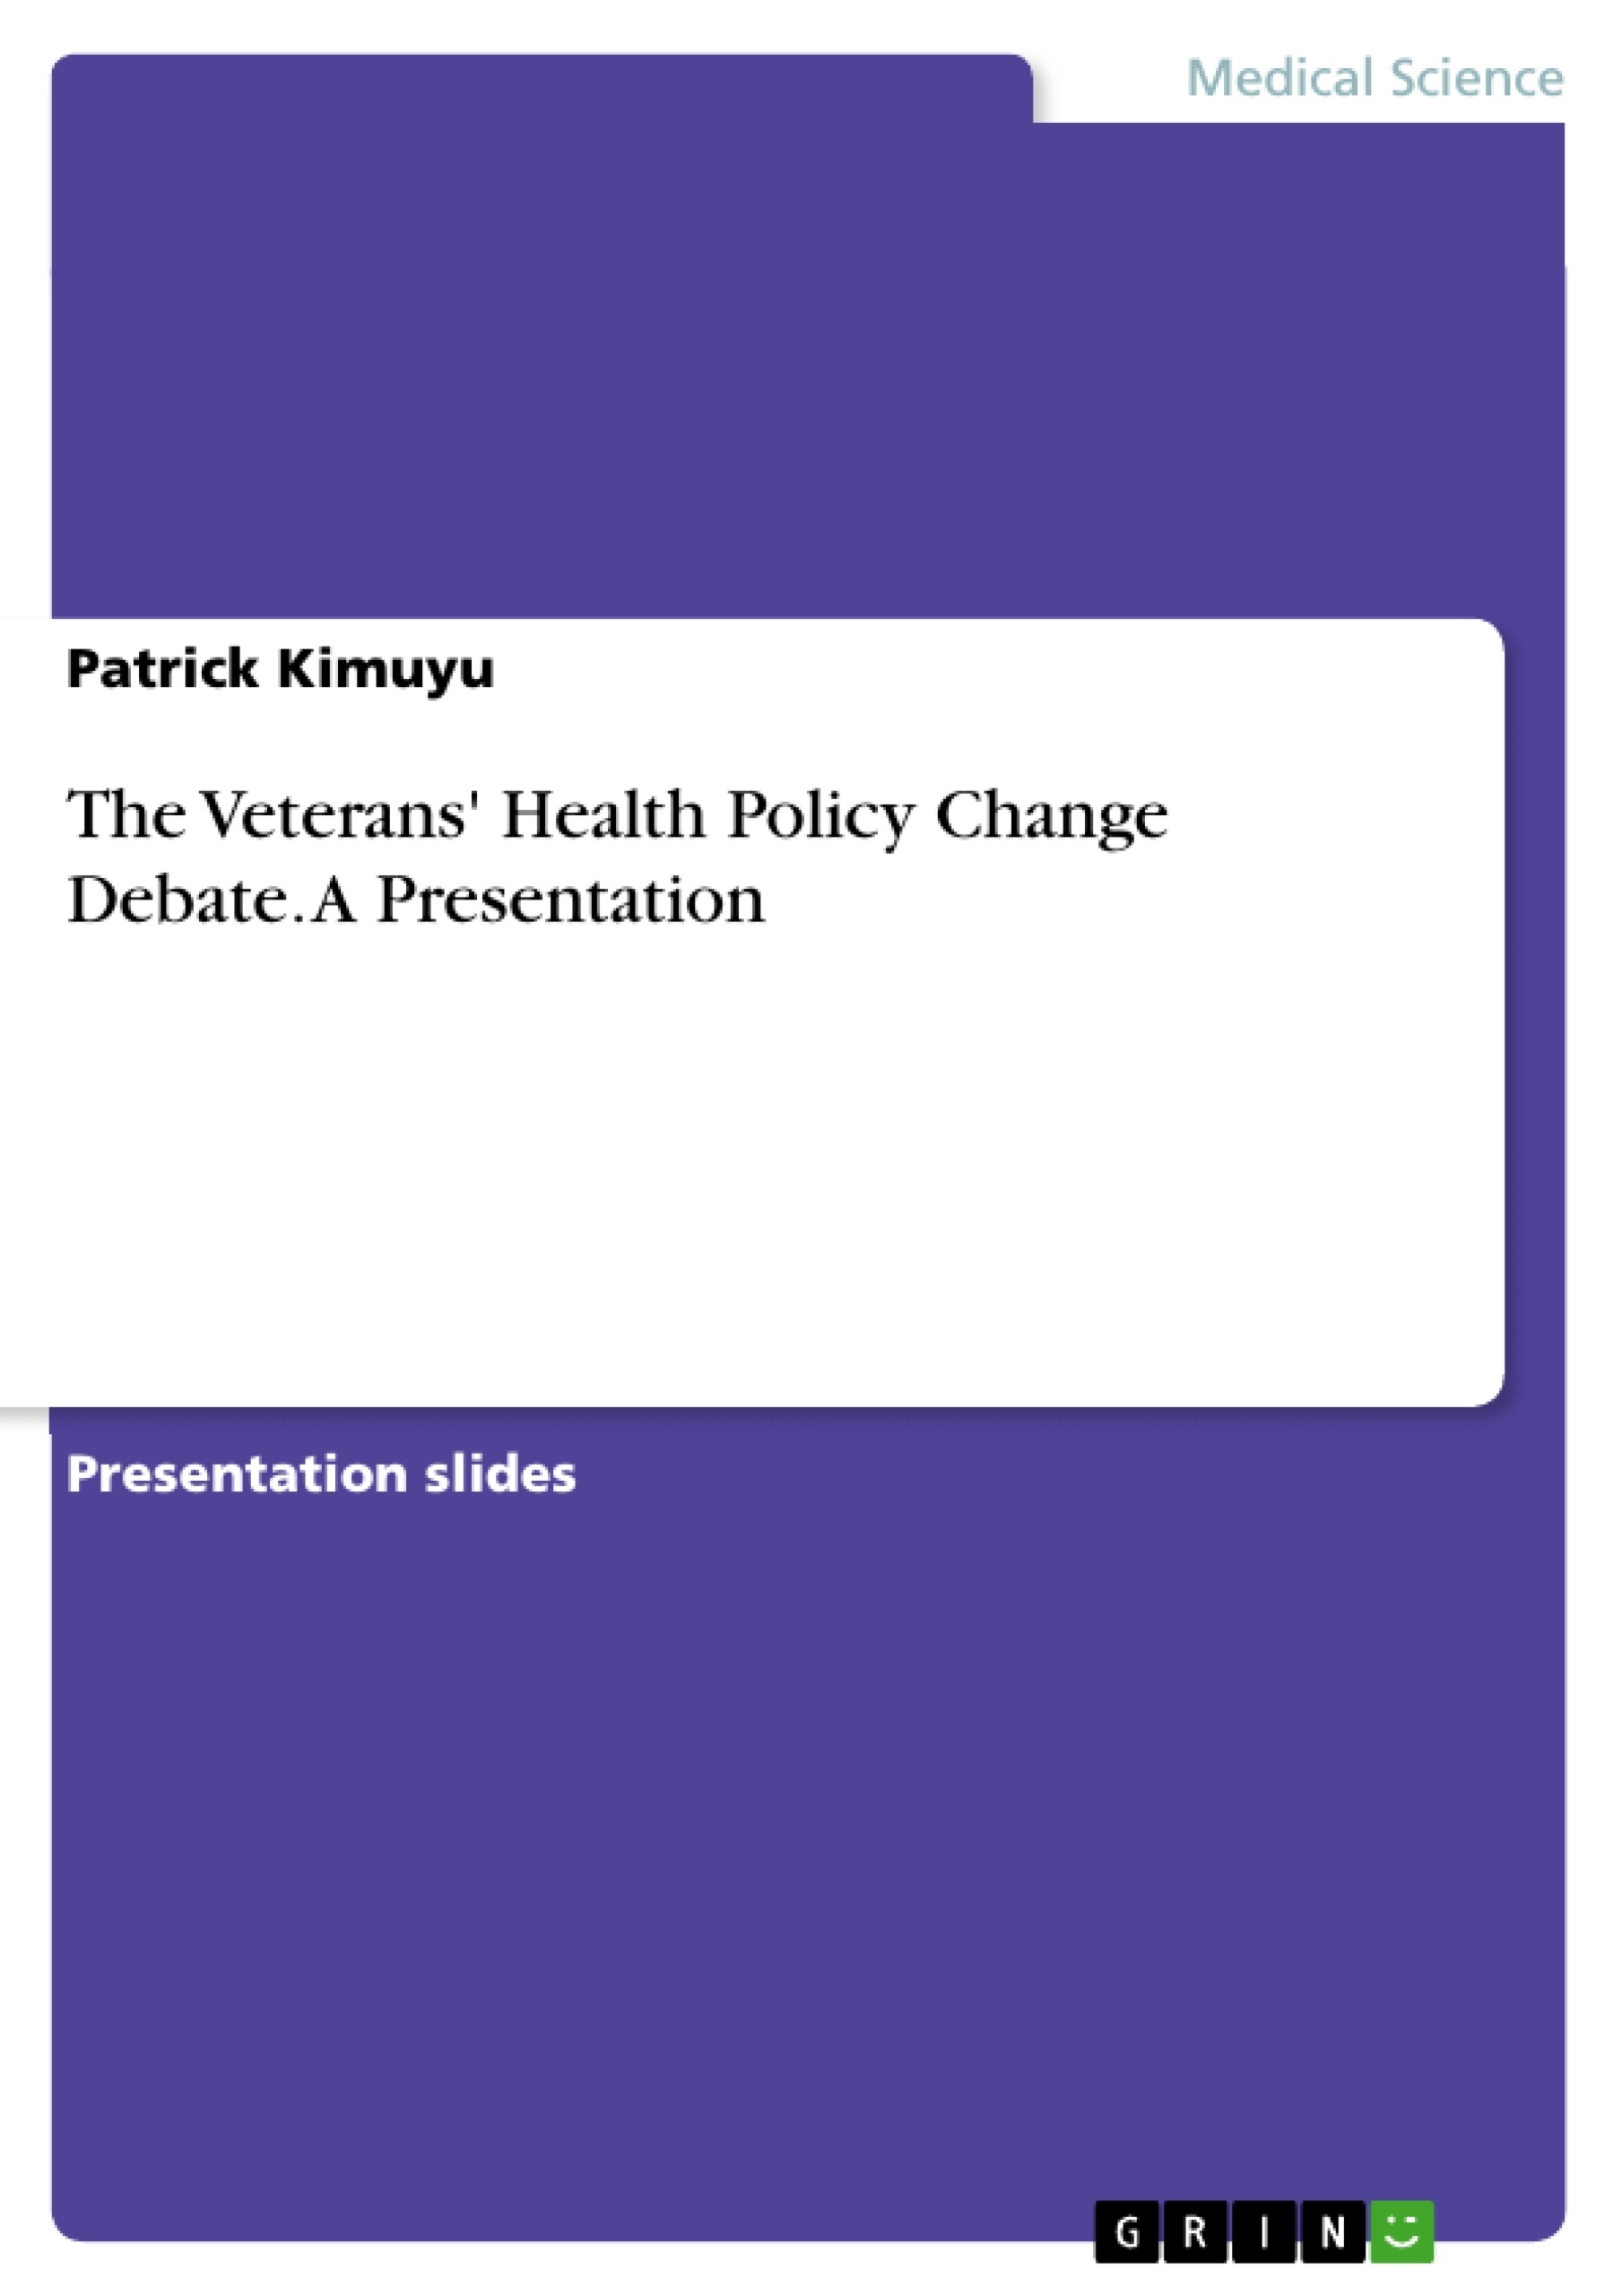 Title: The Veterans' Health Policy Change Debate. A Presentation